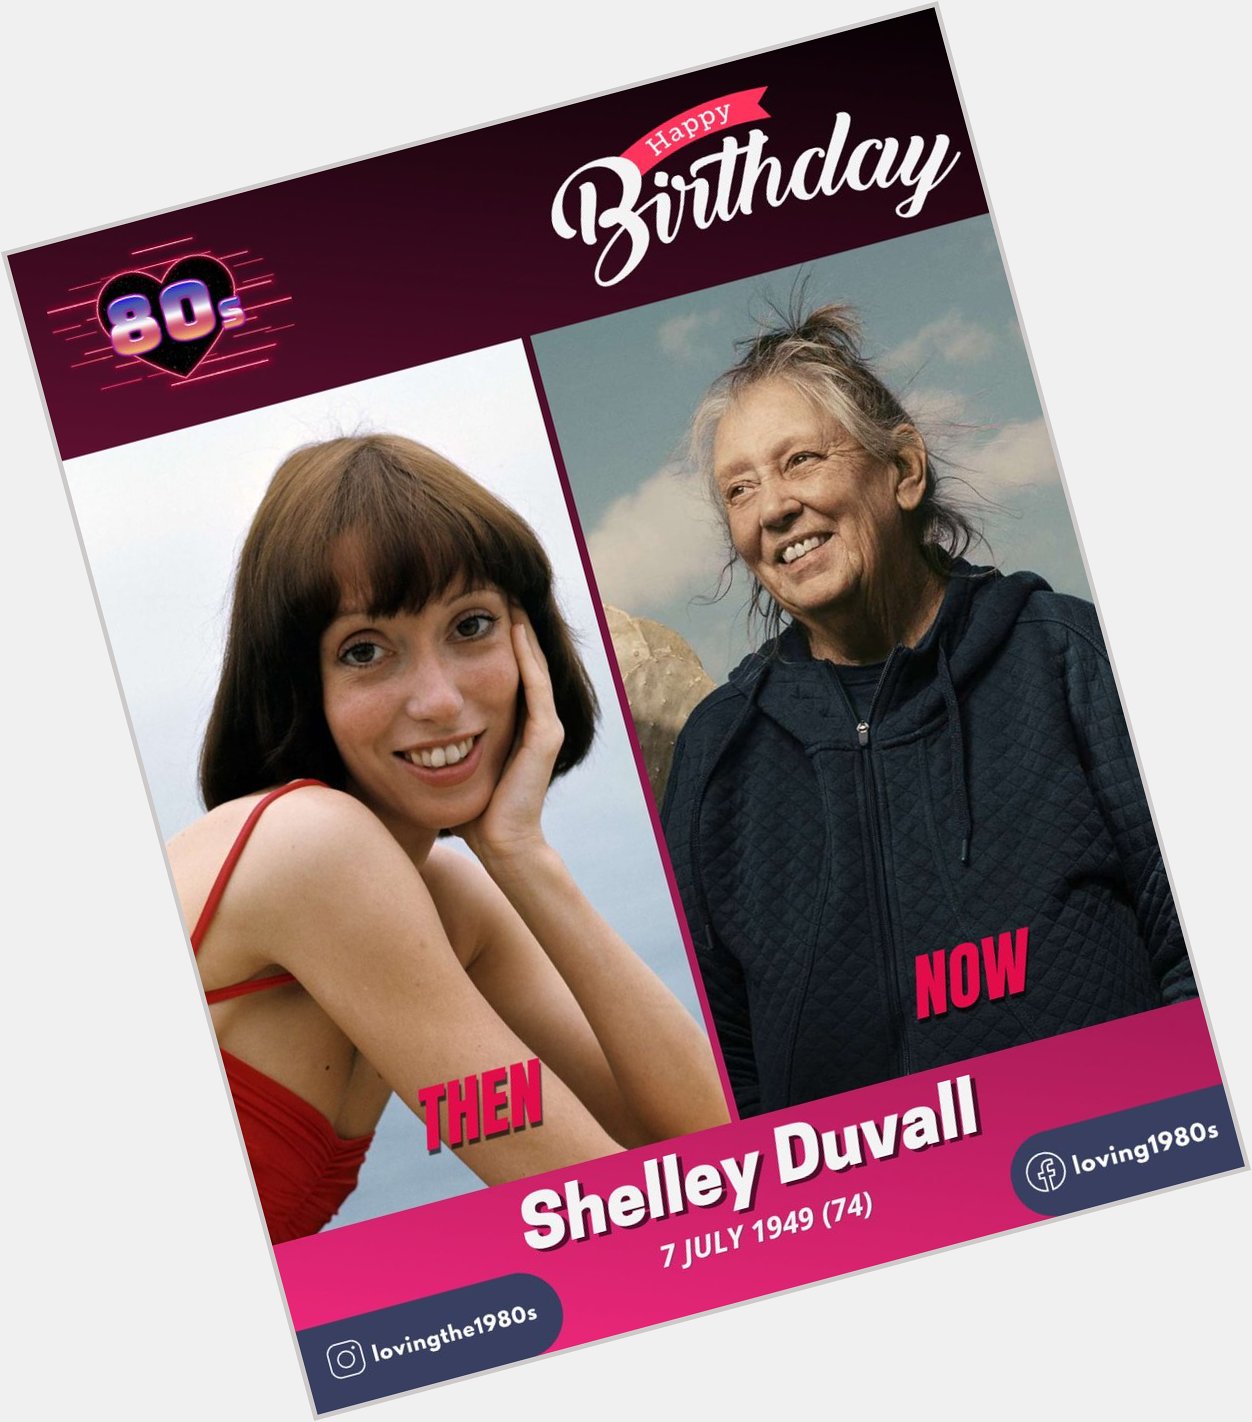 Happy birthday to Shelley Duvall, who turns 74 today!      